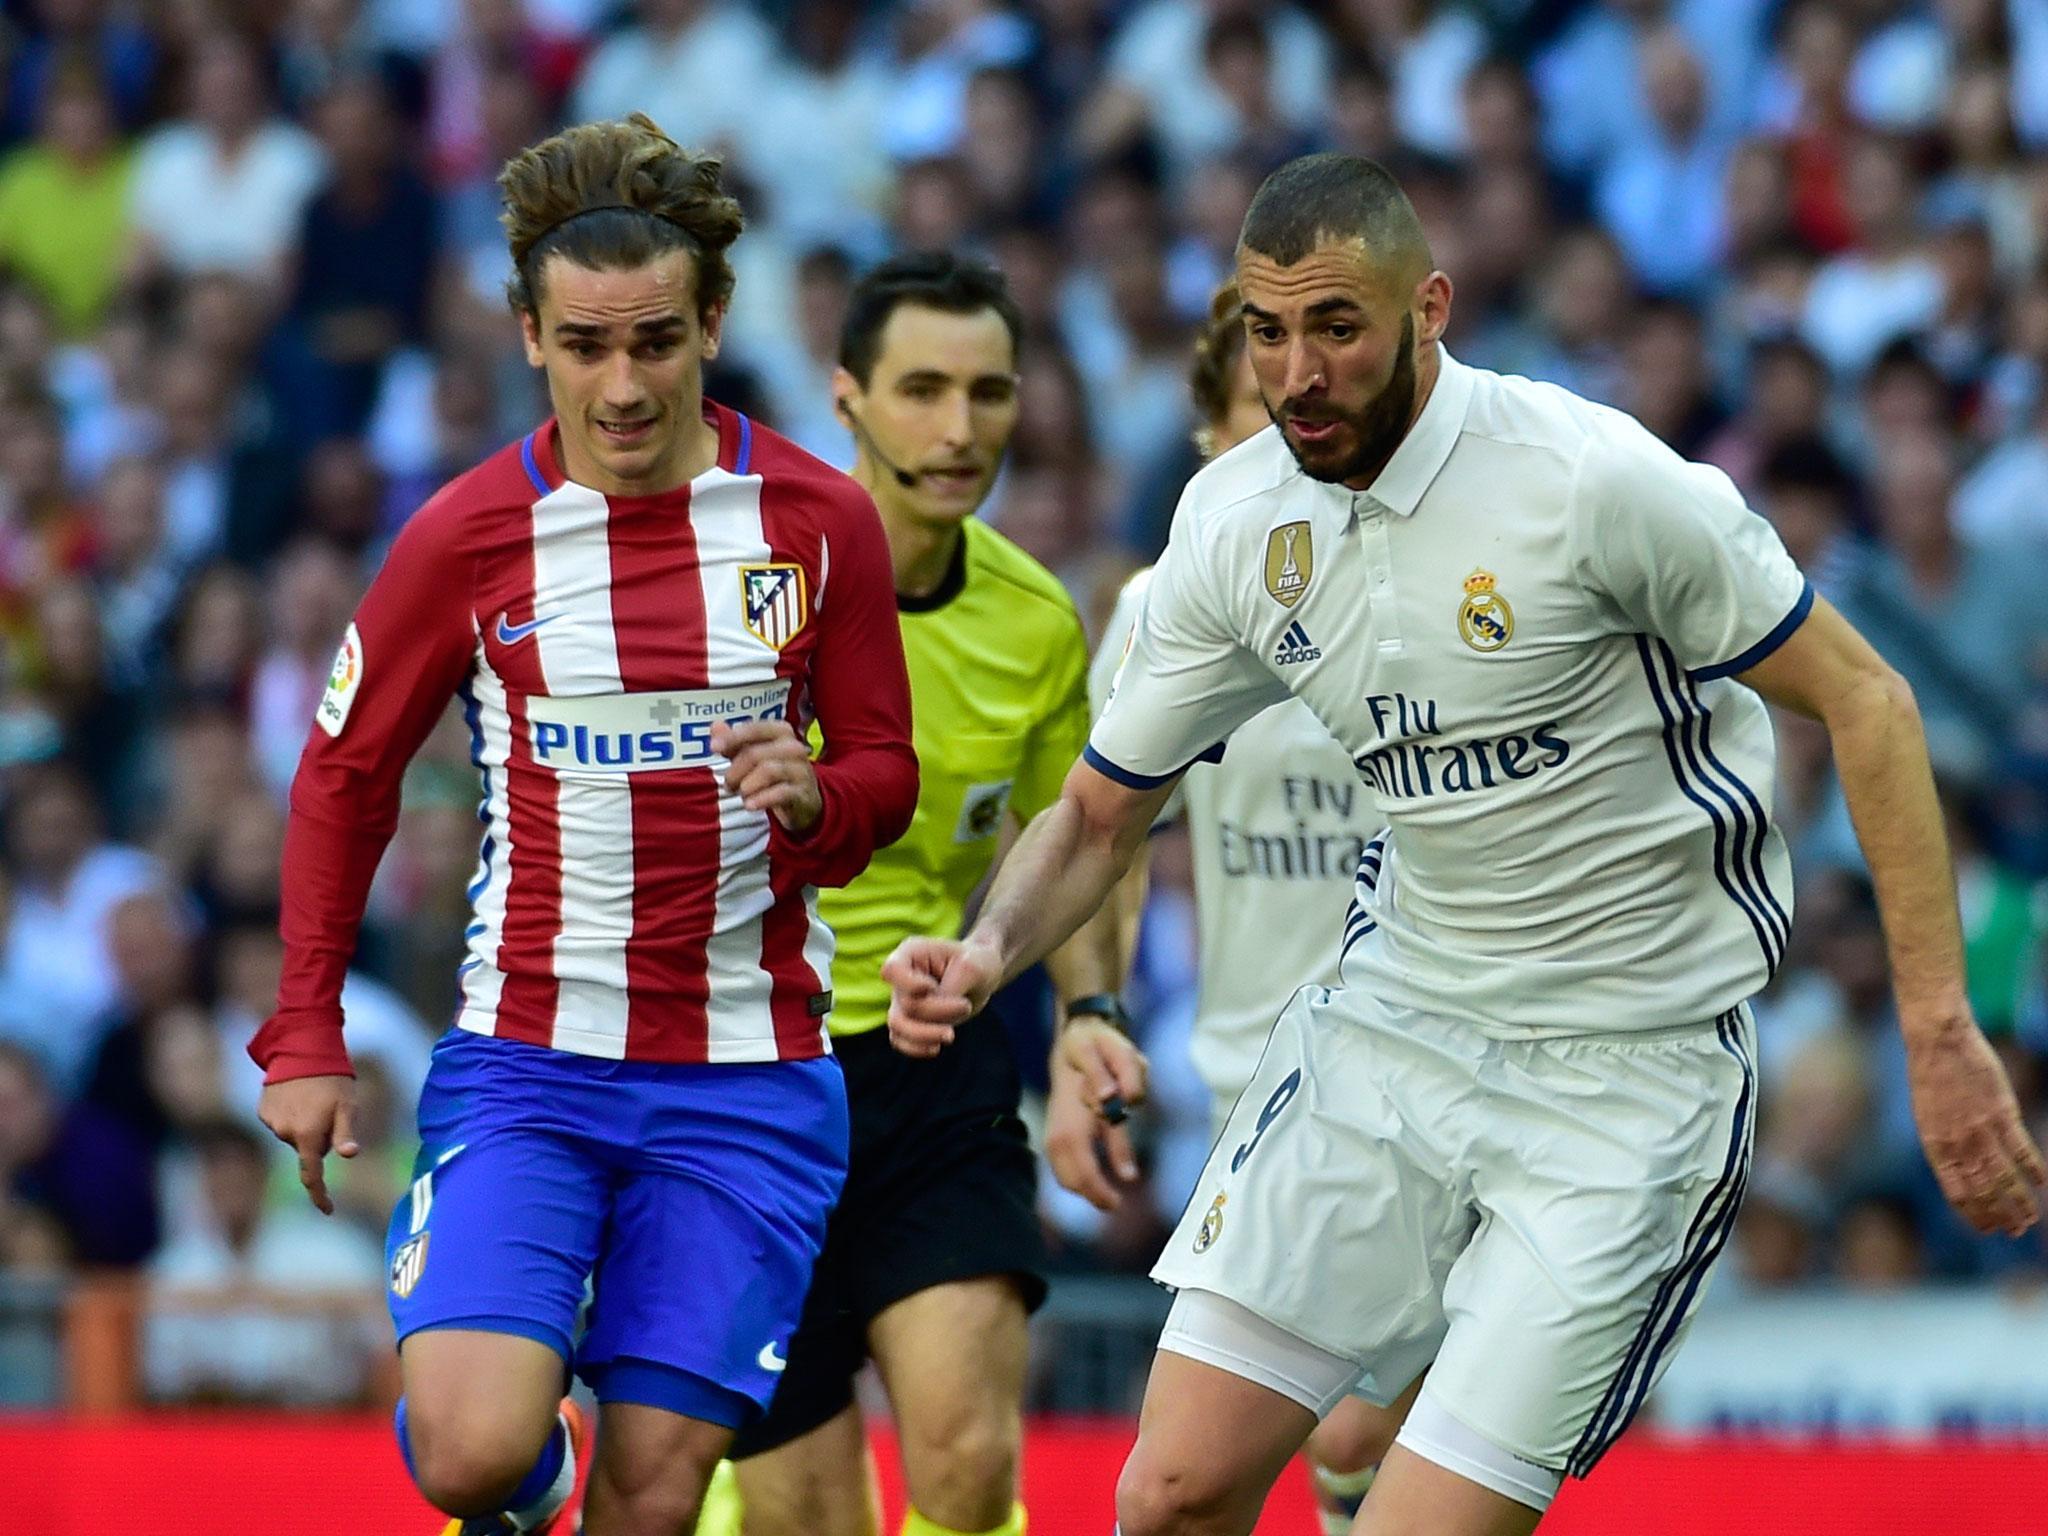 Atletico Madrid and Real Madrid face each other once again in the Champions League